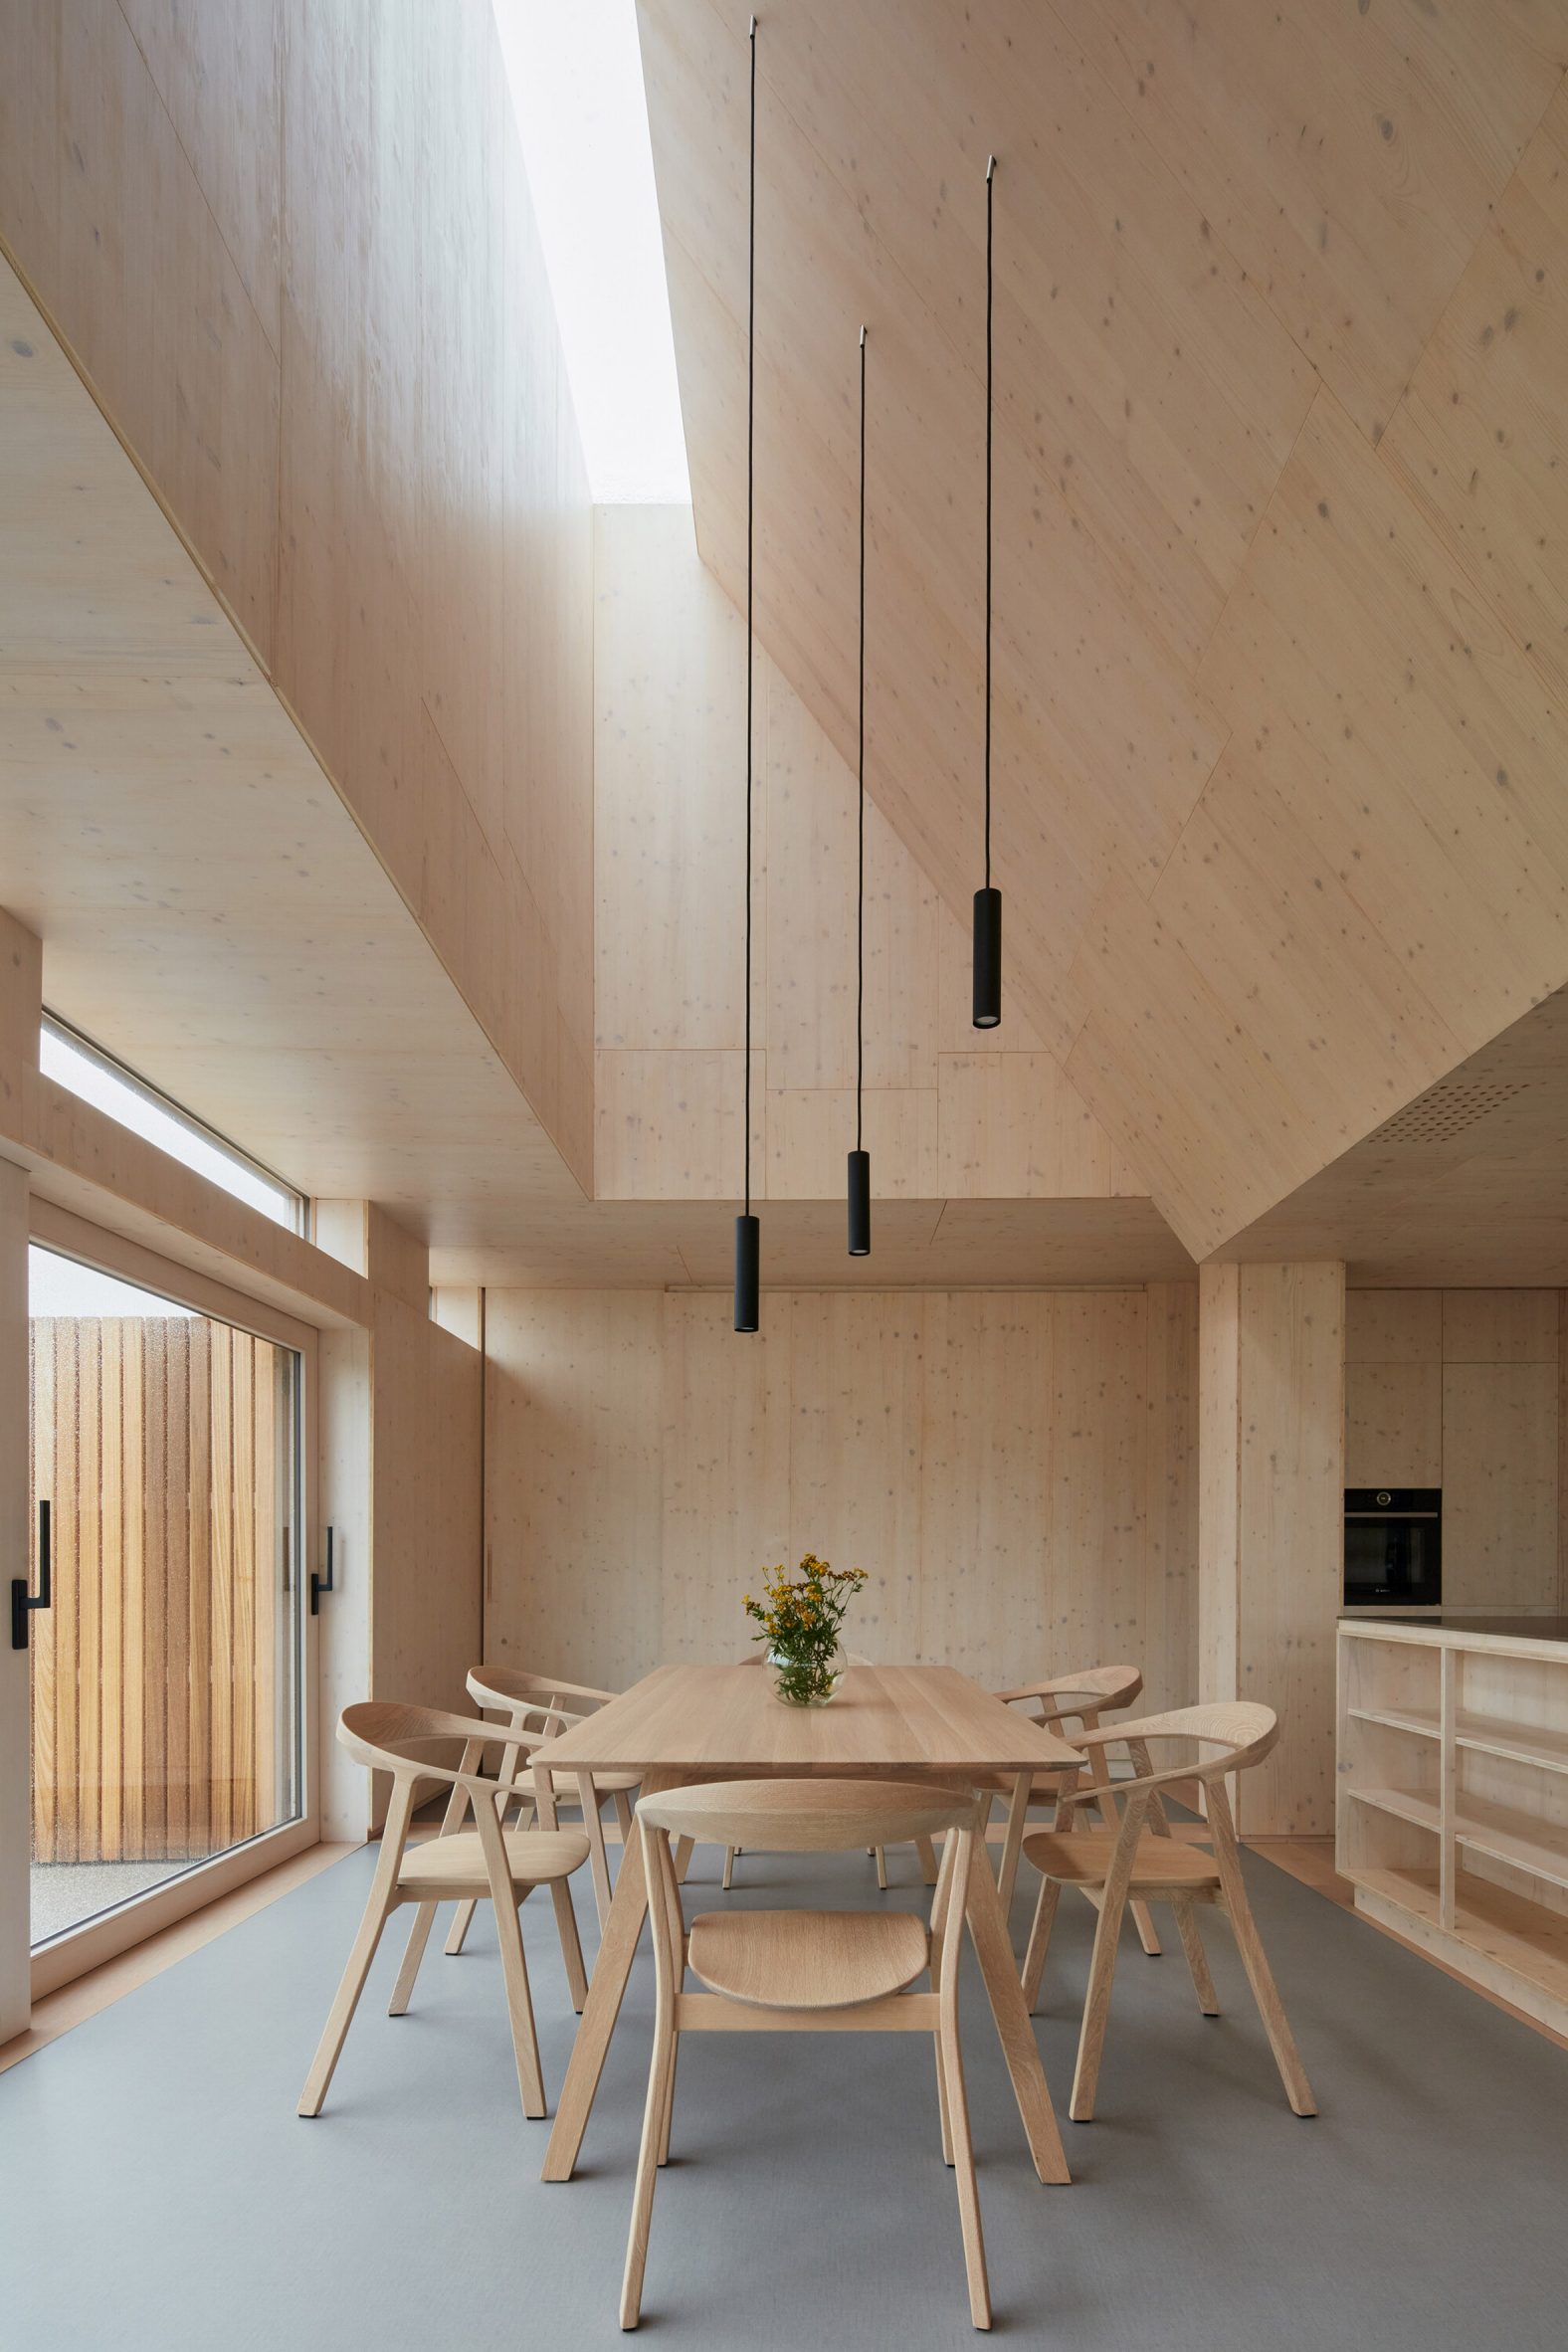 Wood-lined kitchen of Belgian cancer care centre 